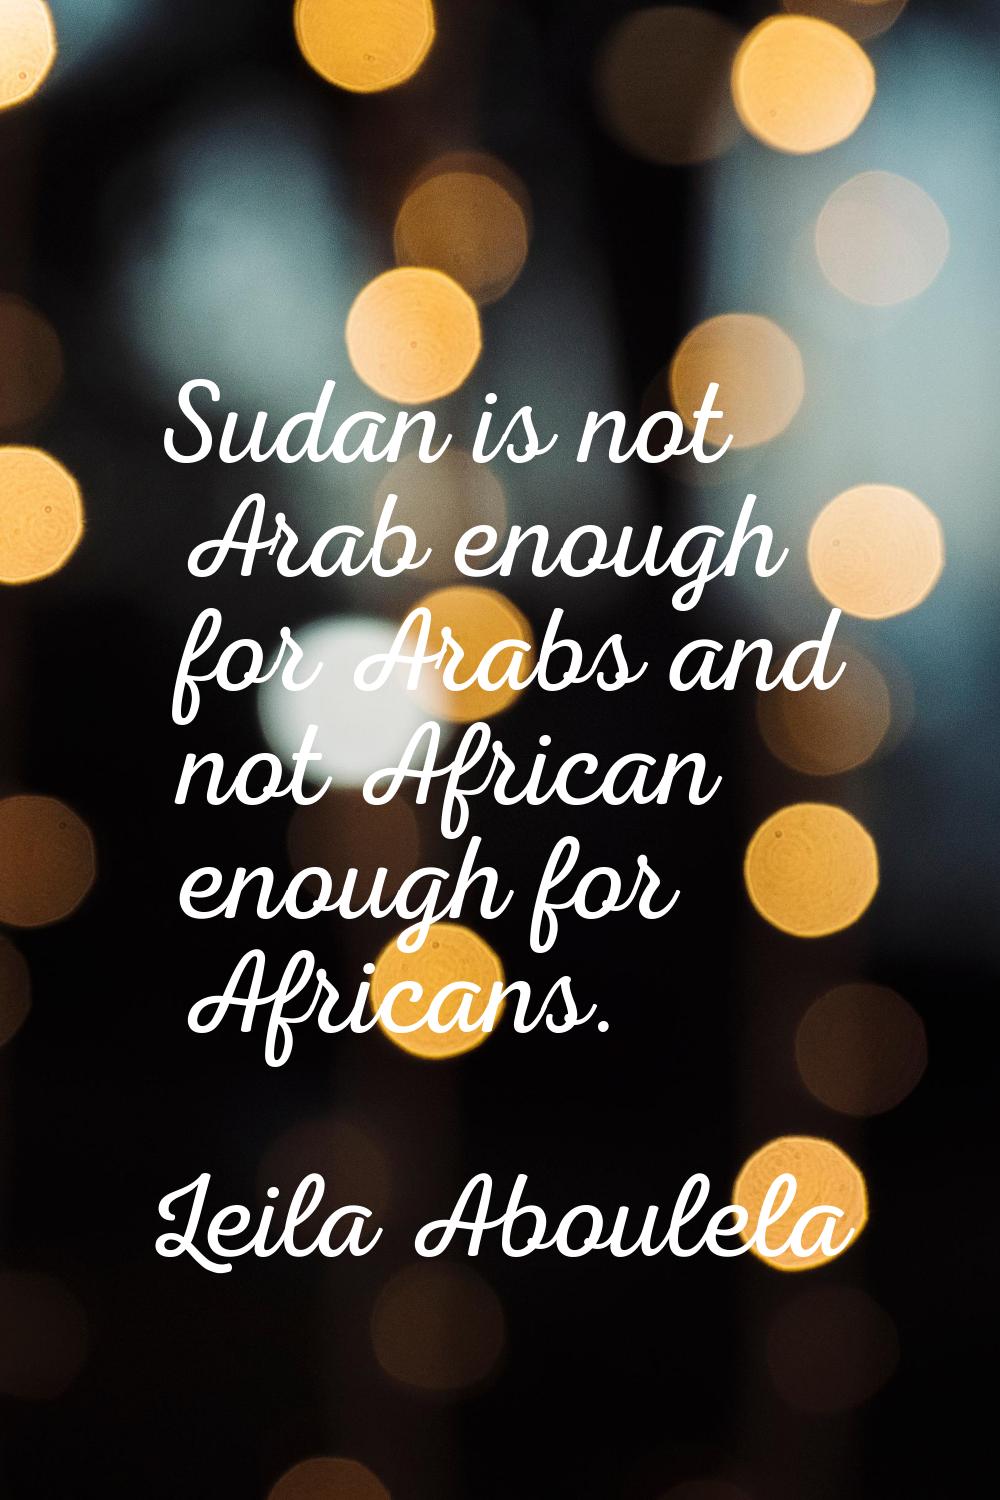 Sudan is not Arab enough for Arabs and not African enough for Africans.